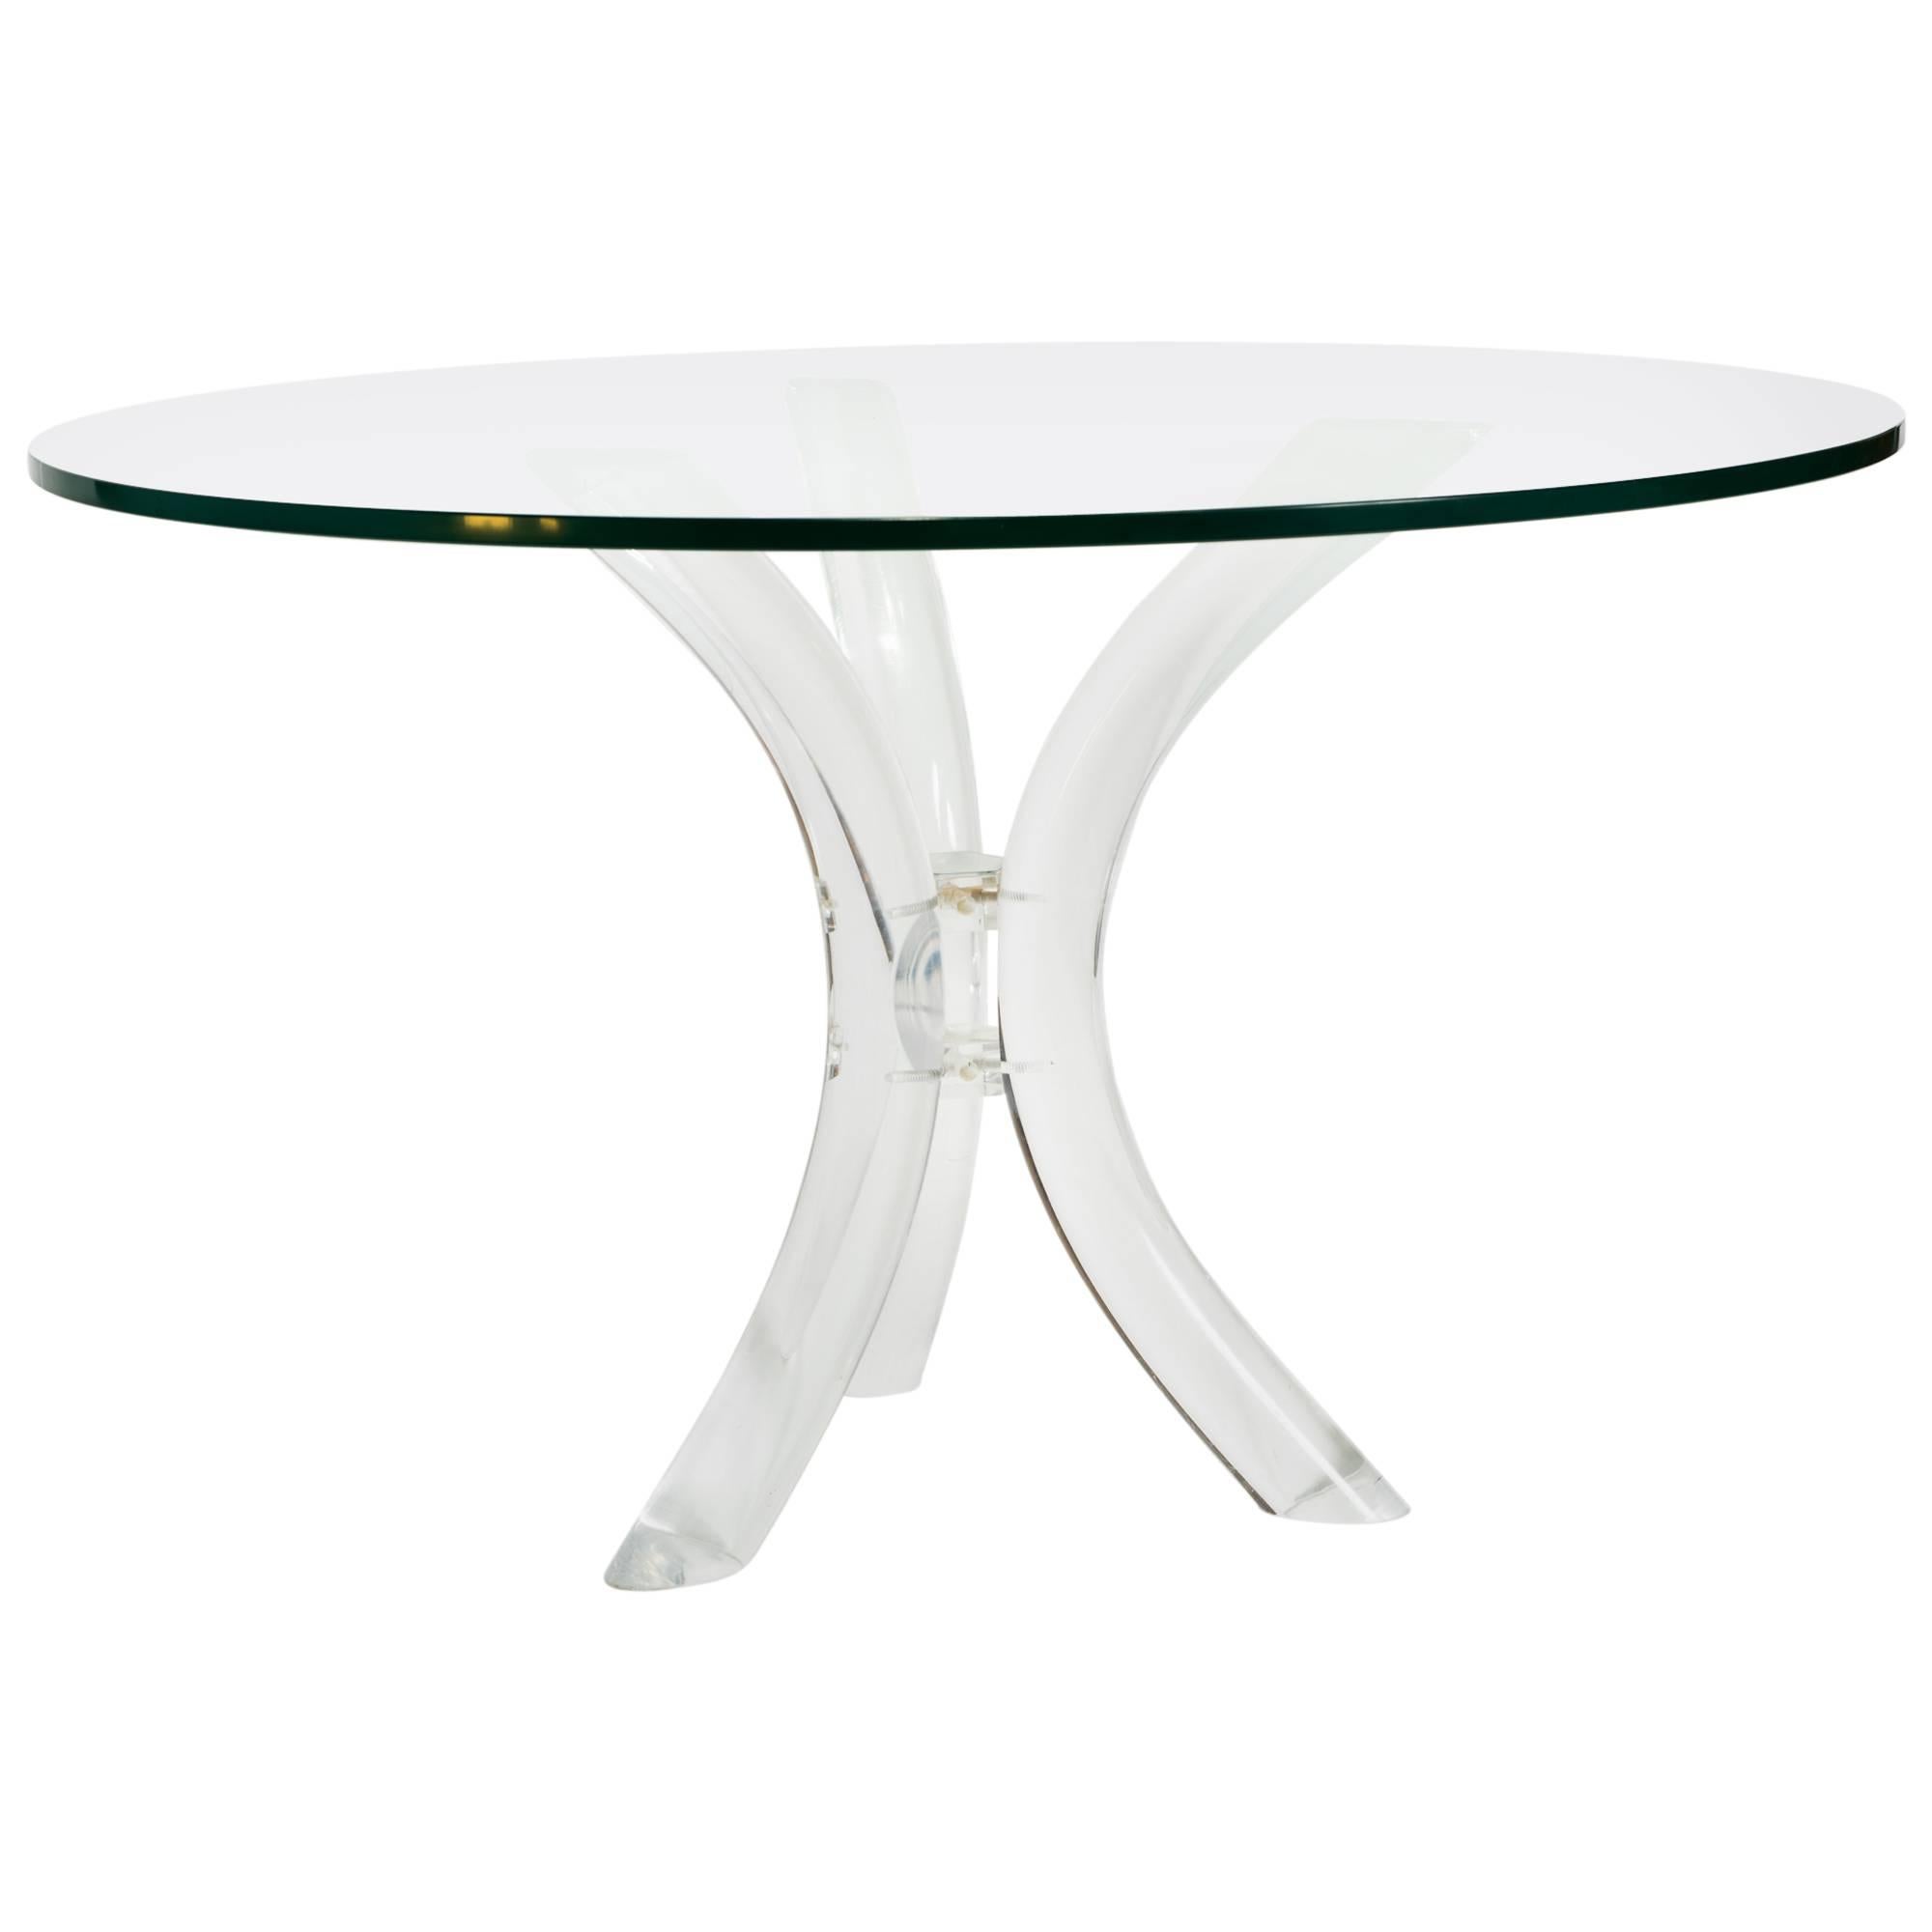 Sabre Bent Lucite Table with Glass Top